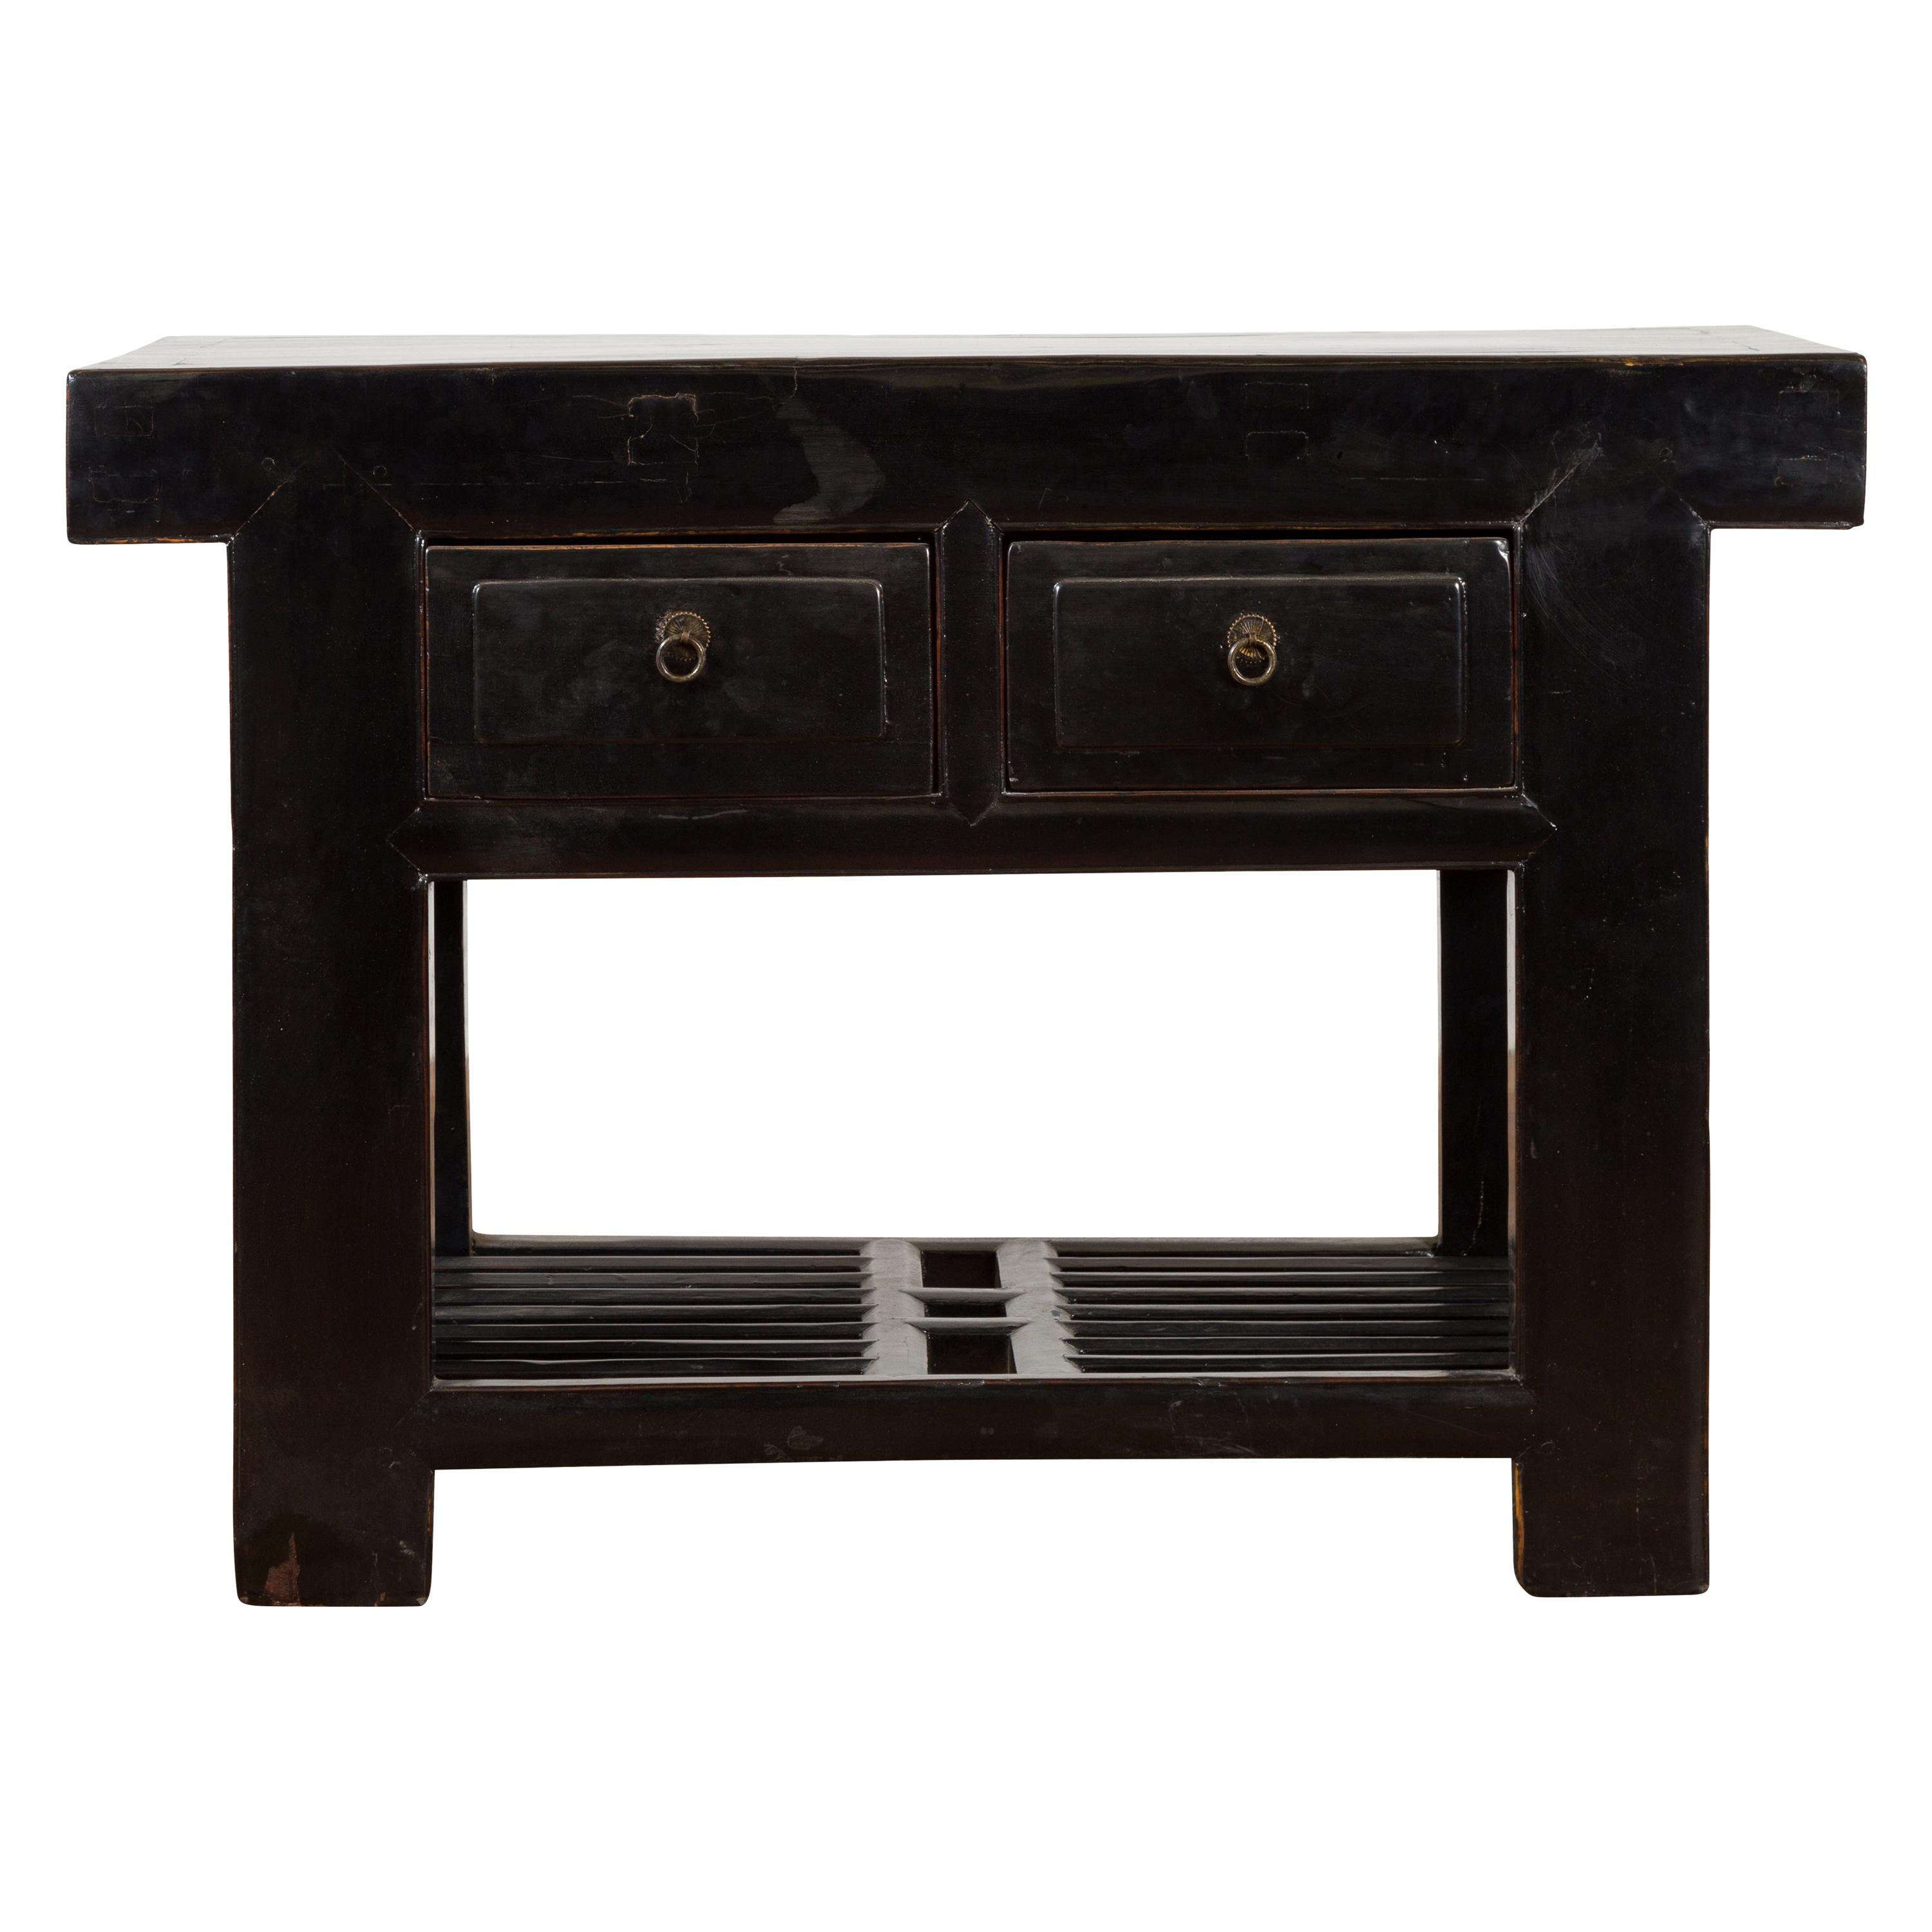 Chinese Early 20th Century Black Lacquered Console Table with Two Drawers